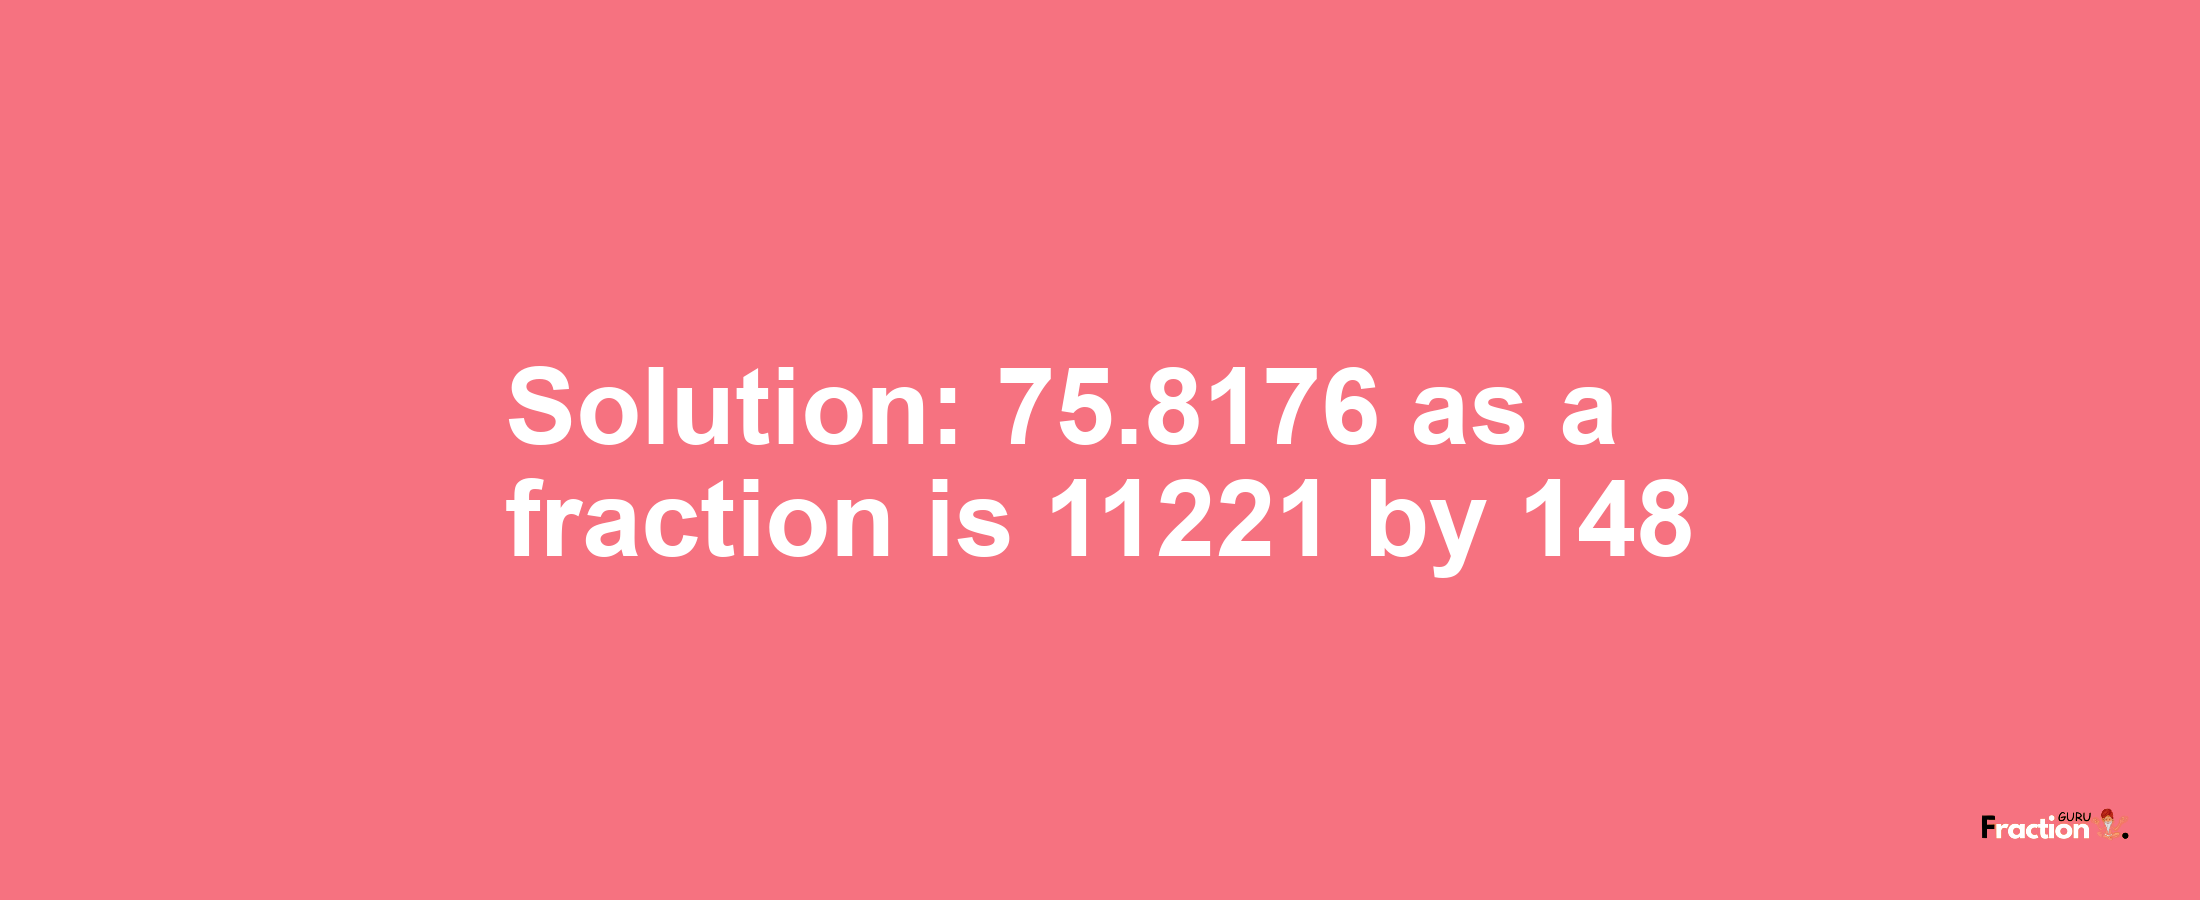 Solution:75.8176 as a fraction is 11221/148